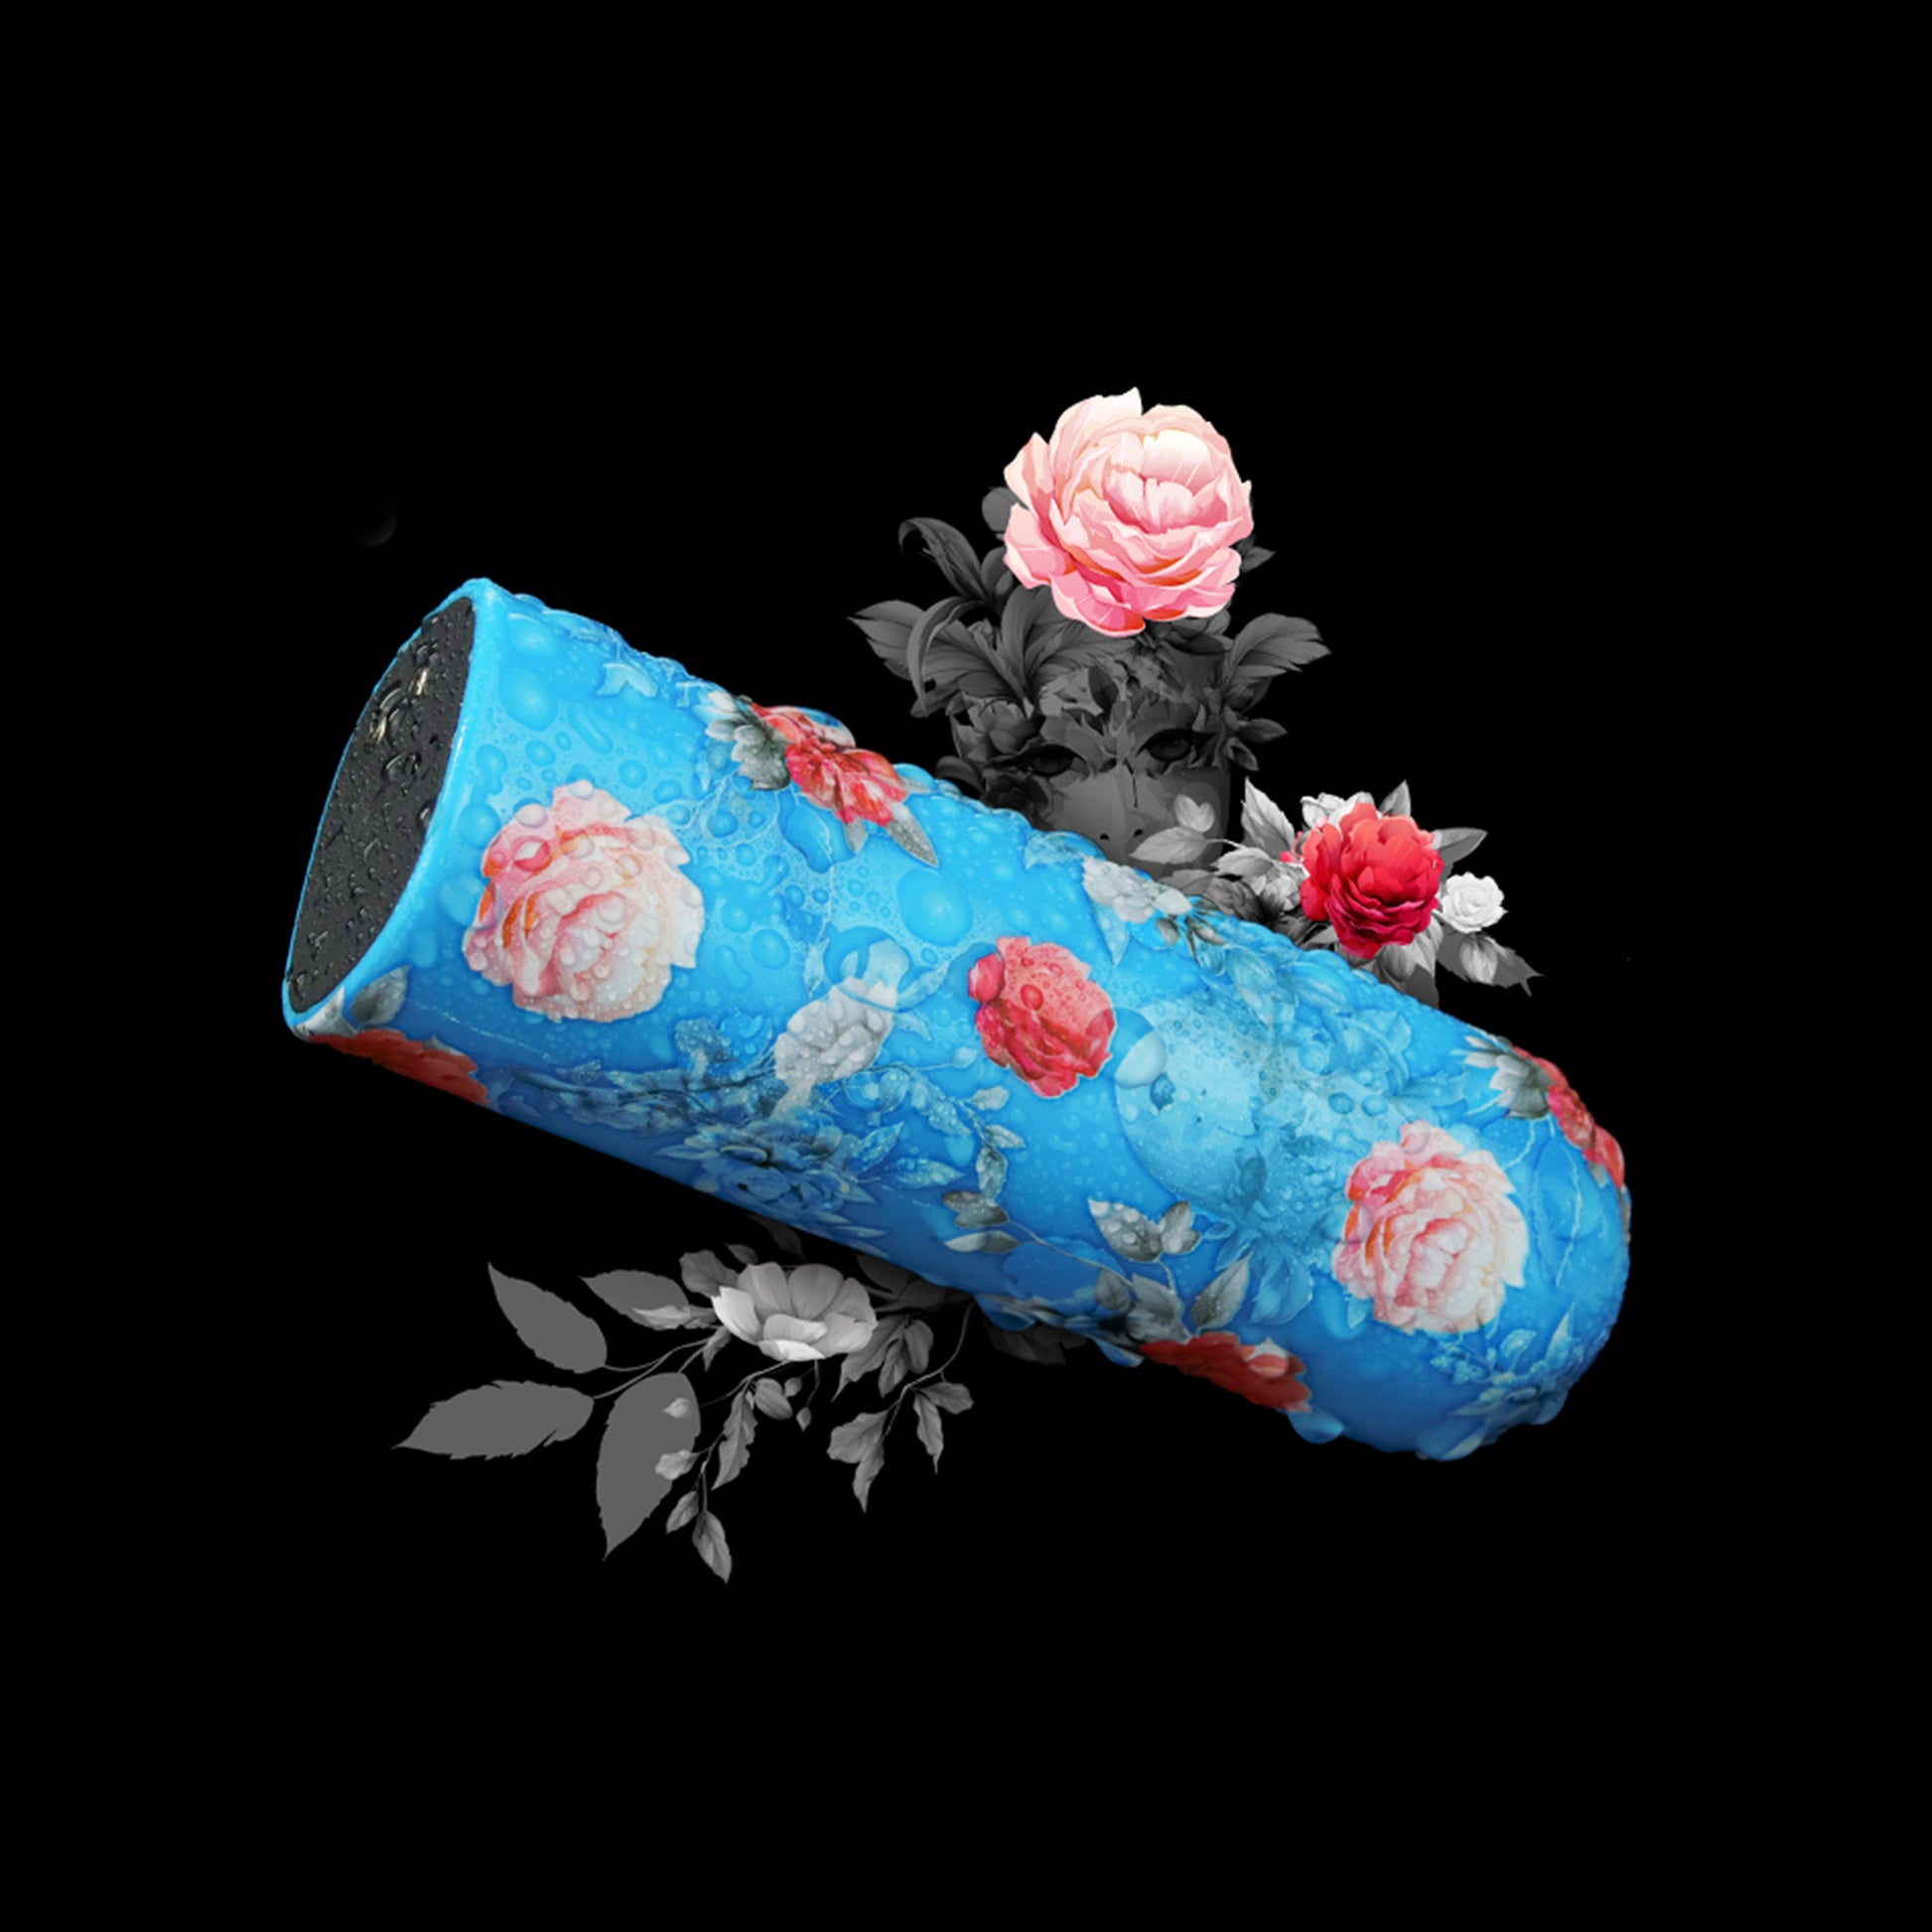 The blue floral pattern of the mini bullet vibrator massager